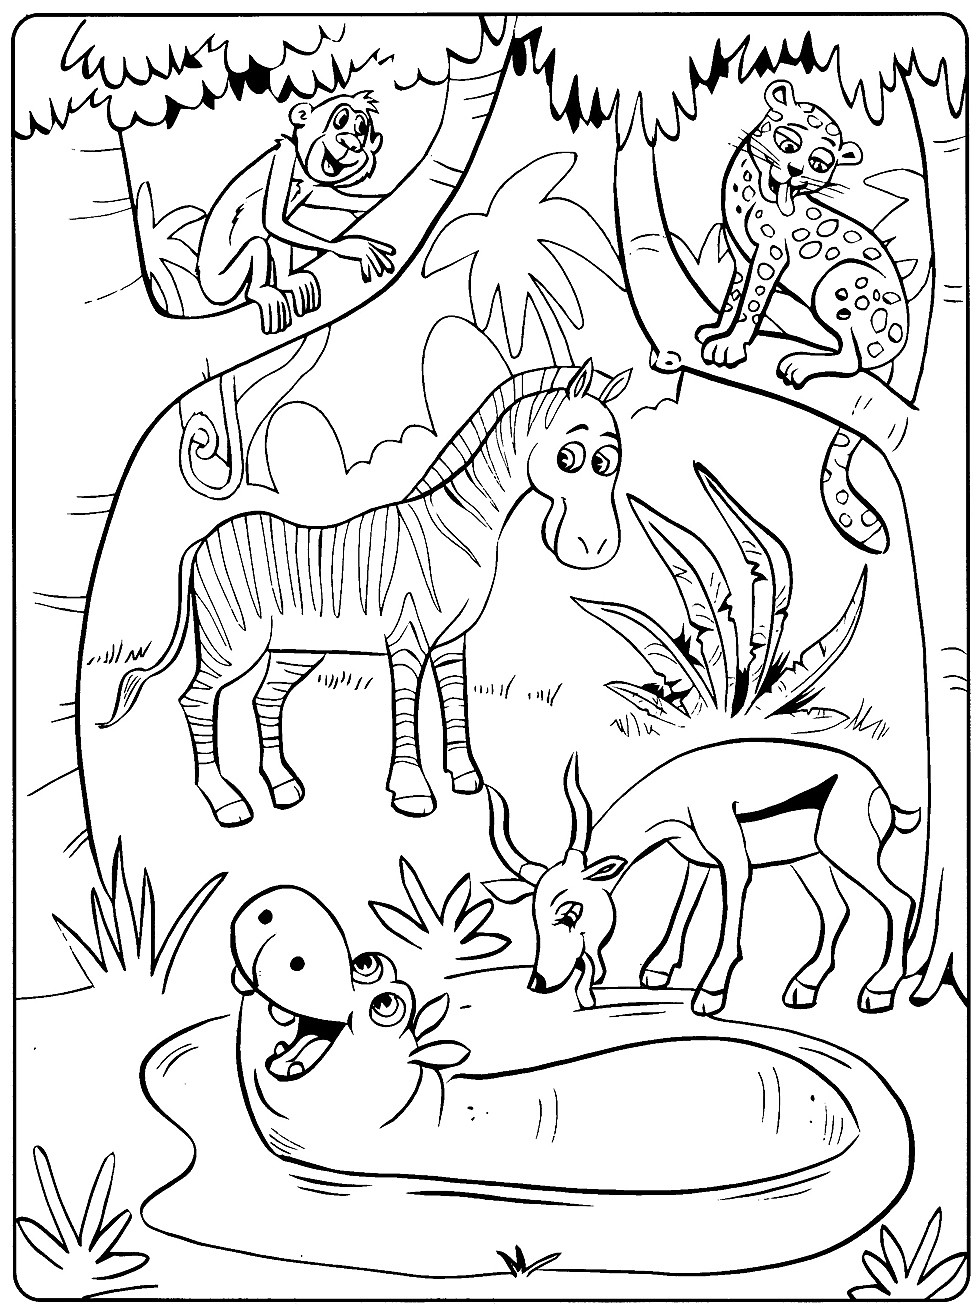 Coloring Sheet For Toddlers
 Toddler Coloring Pages